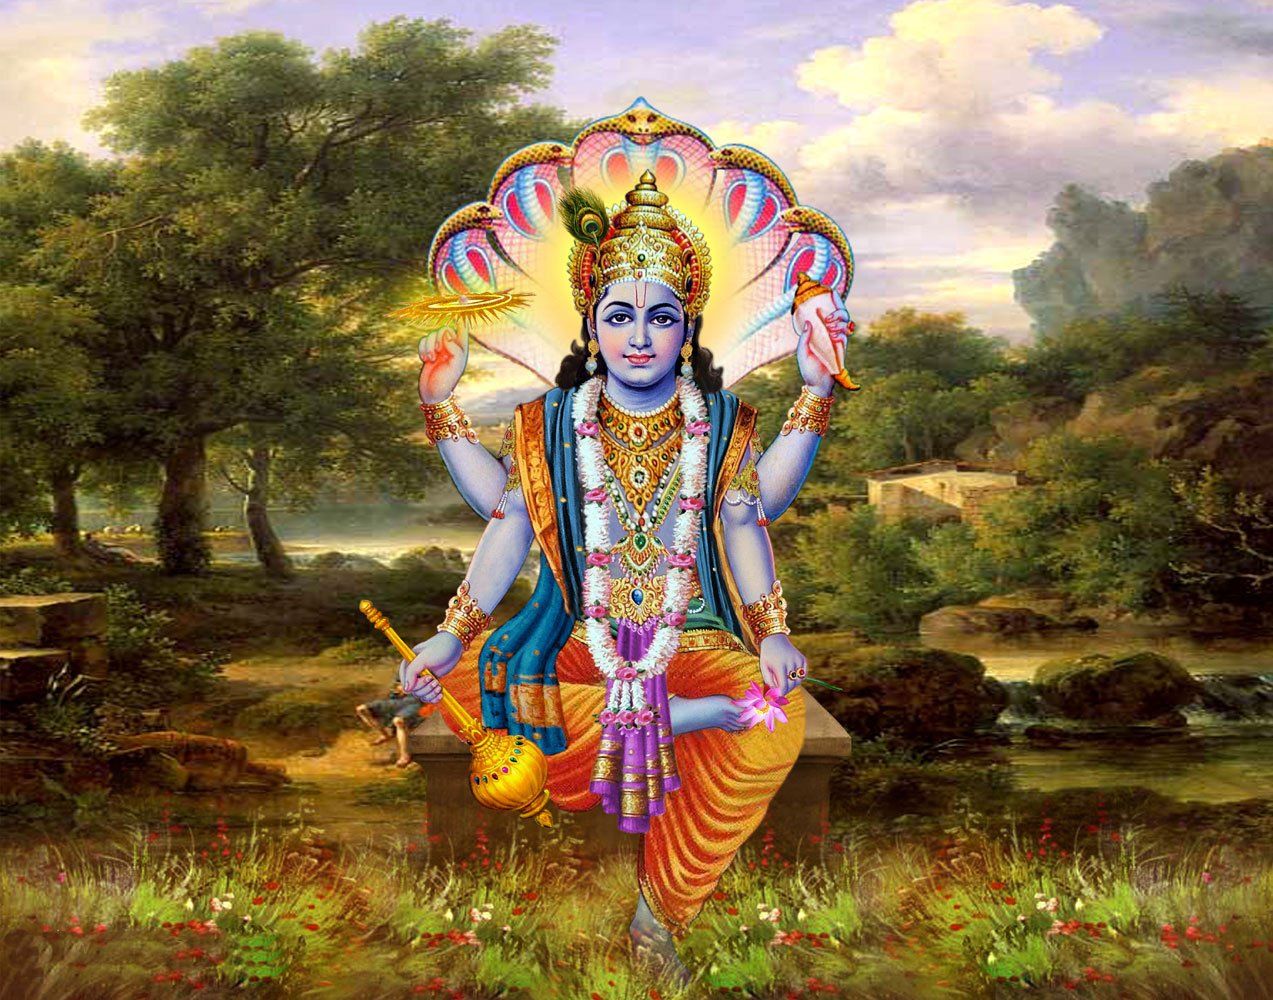 Letest Lord Vishnu Picture Full HD Wallpaper ou can make Beautiful Photography Lord Vishnu wallpaper for your desktop background of love